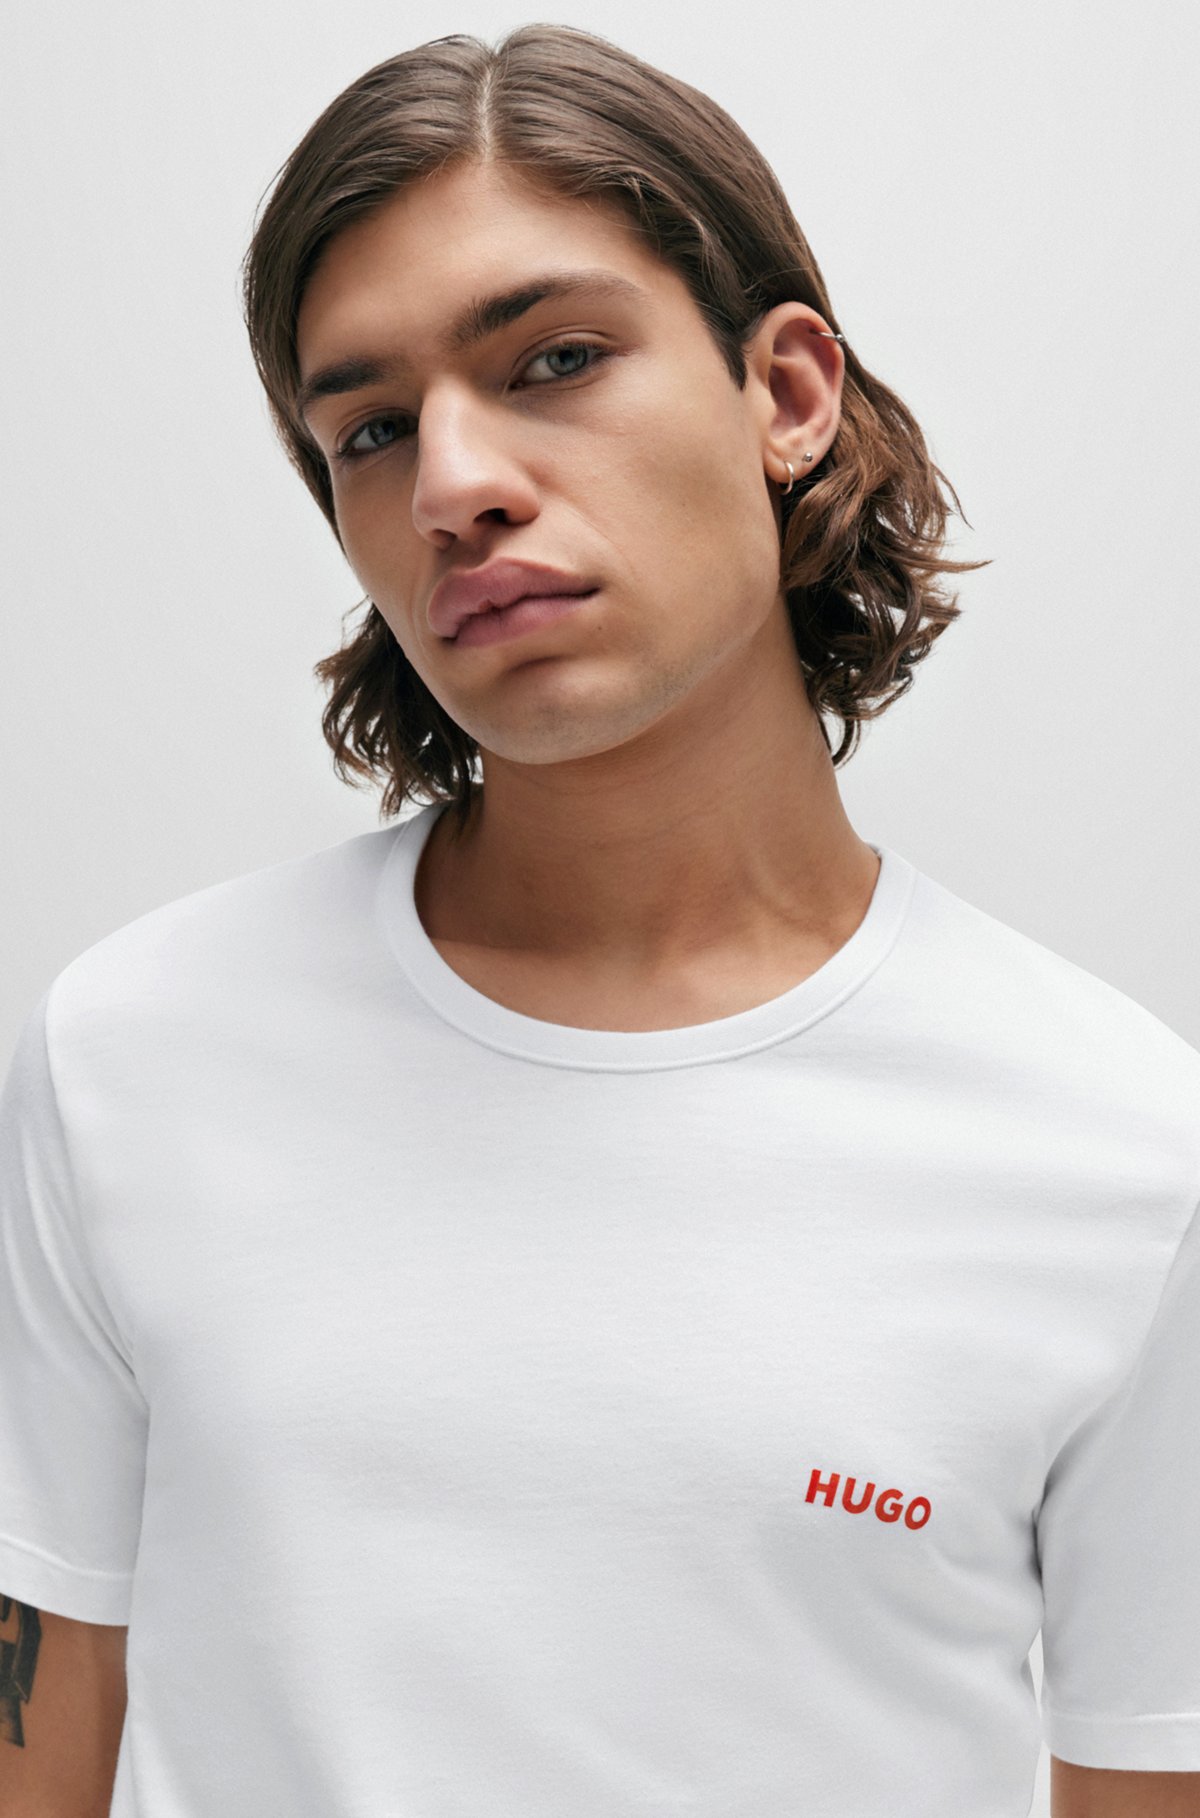 HUGO - Three-pack of underwear T-shirts in cotton with logos